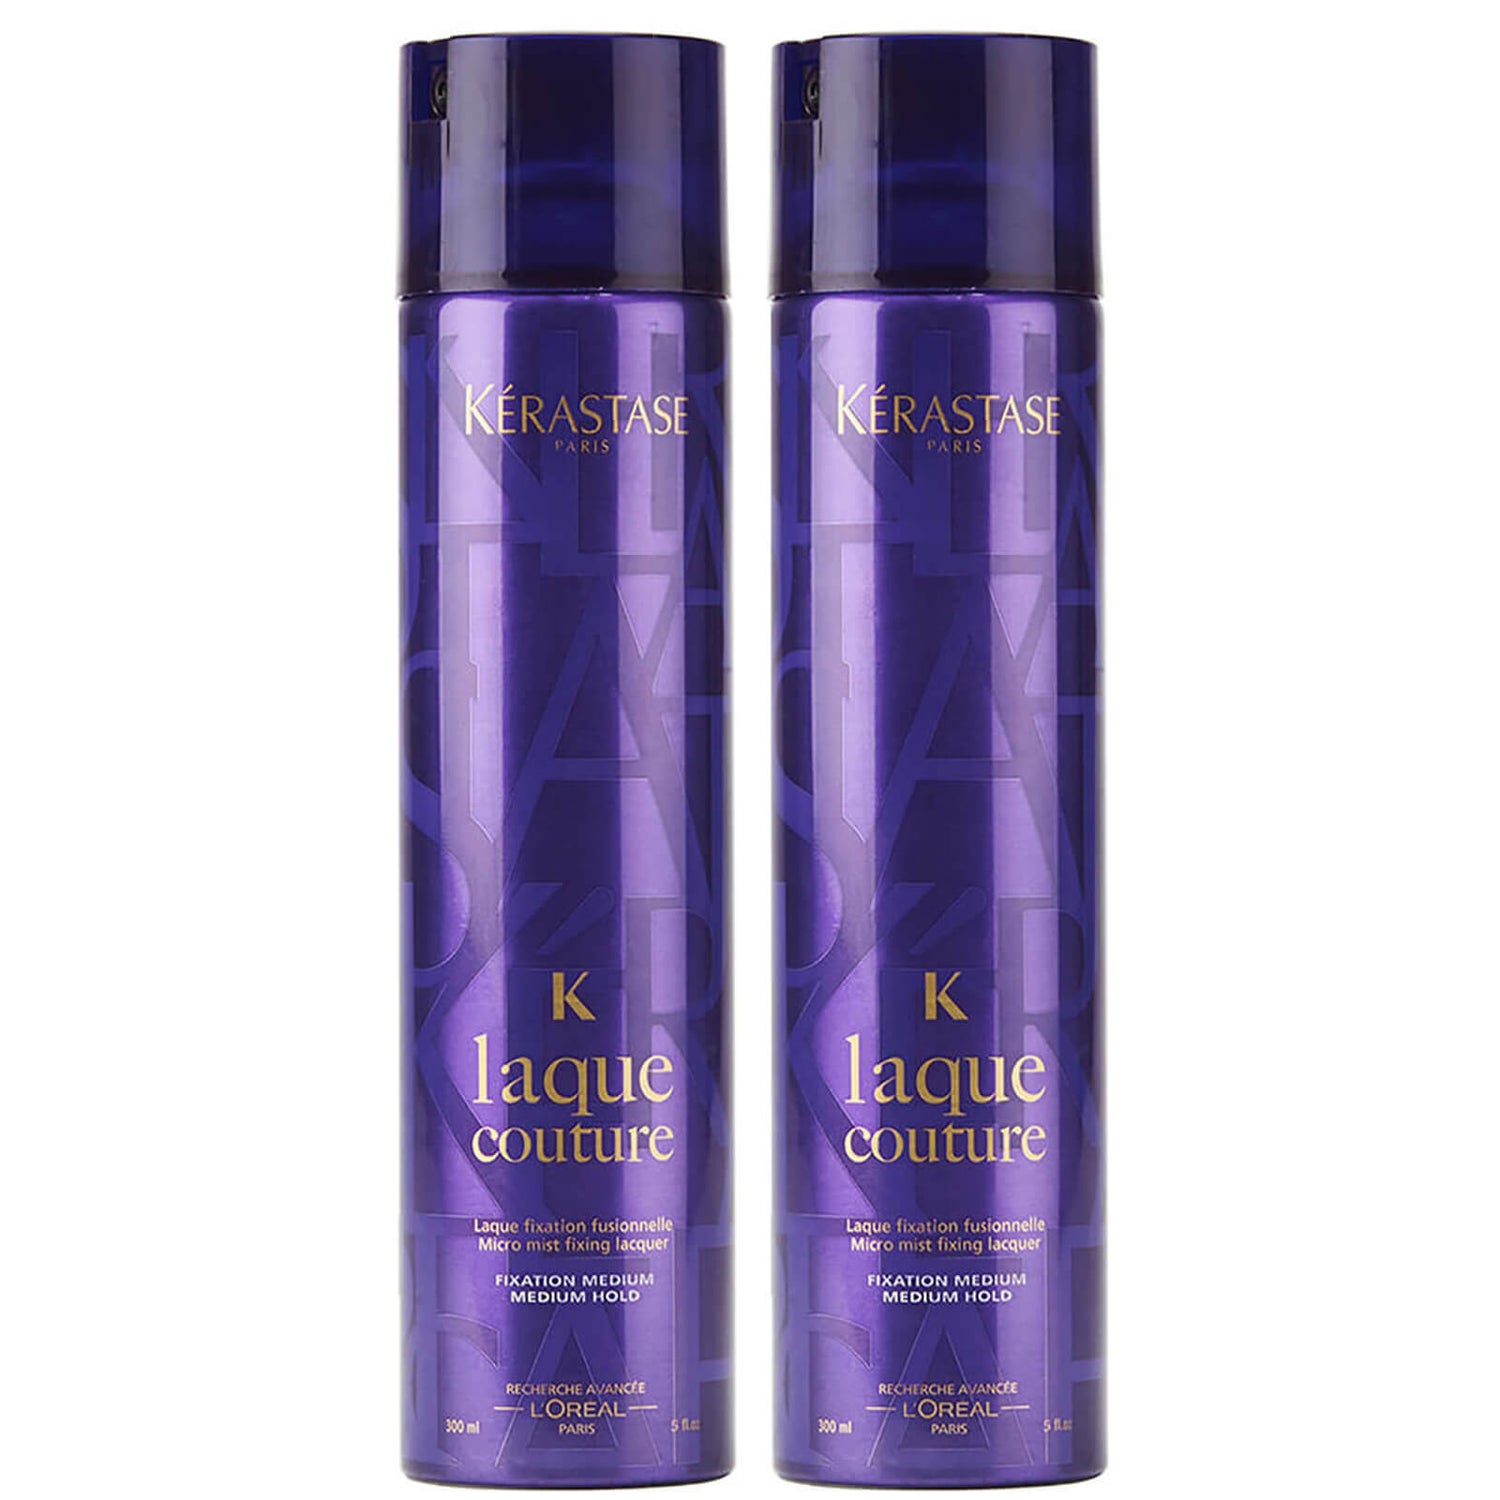 Kérastase Styling Laque Couture 300 ml Duo